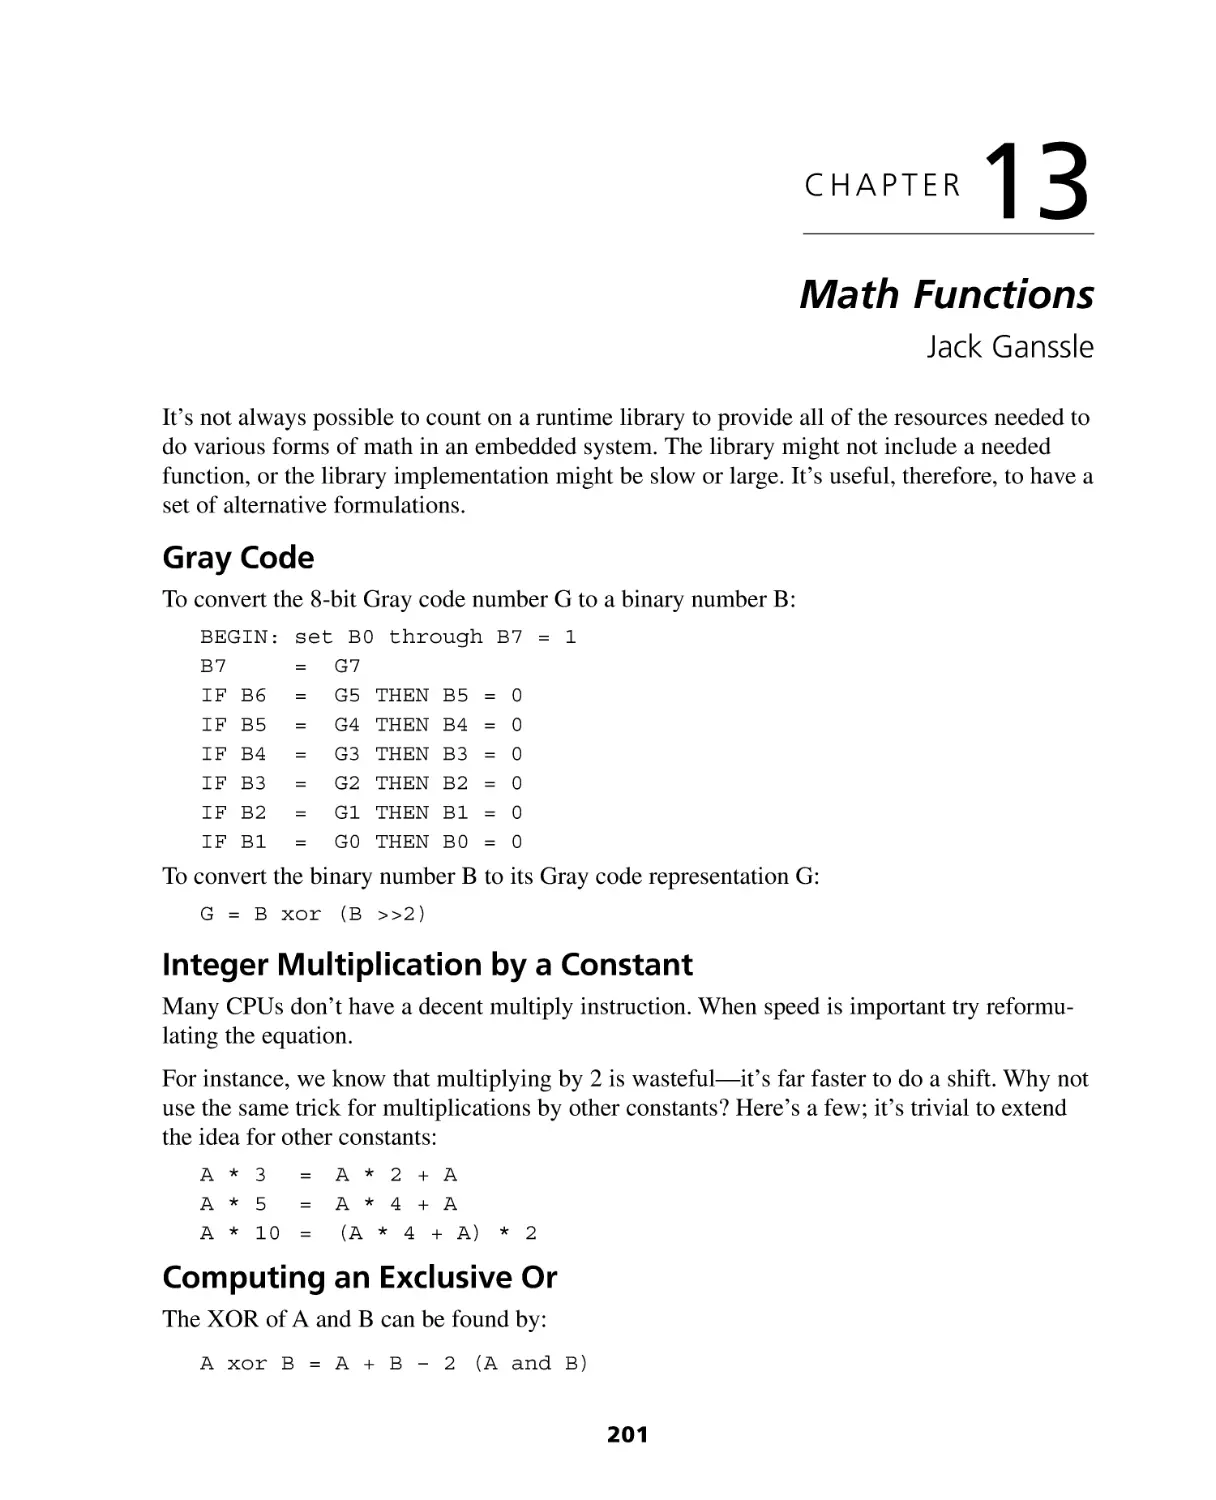 Chapter 13
Gray Code
Integer Multiplication by a Constant
Computing an Exclusive Or